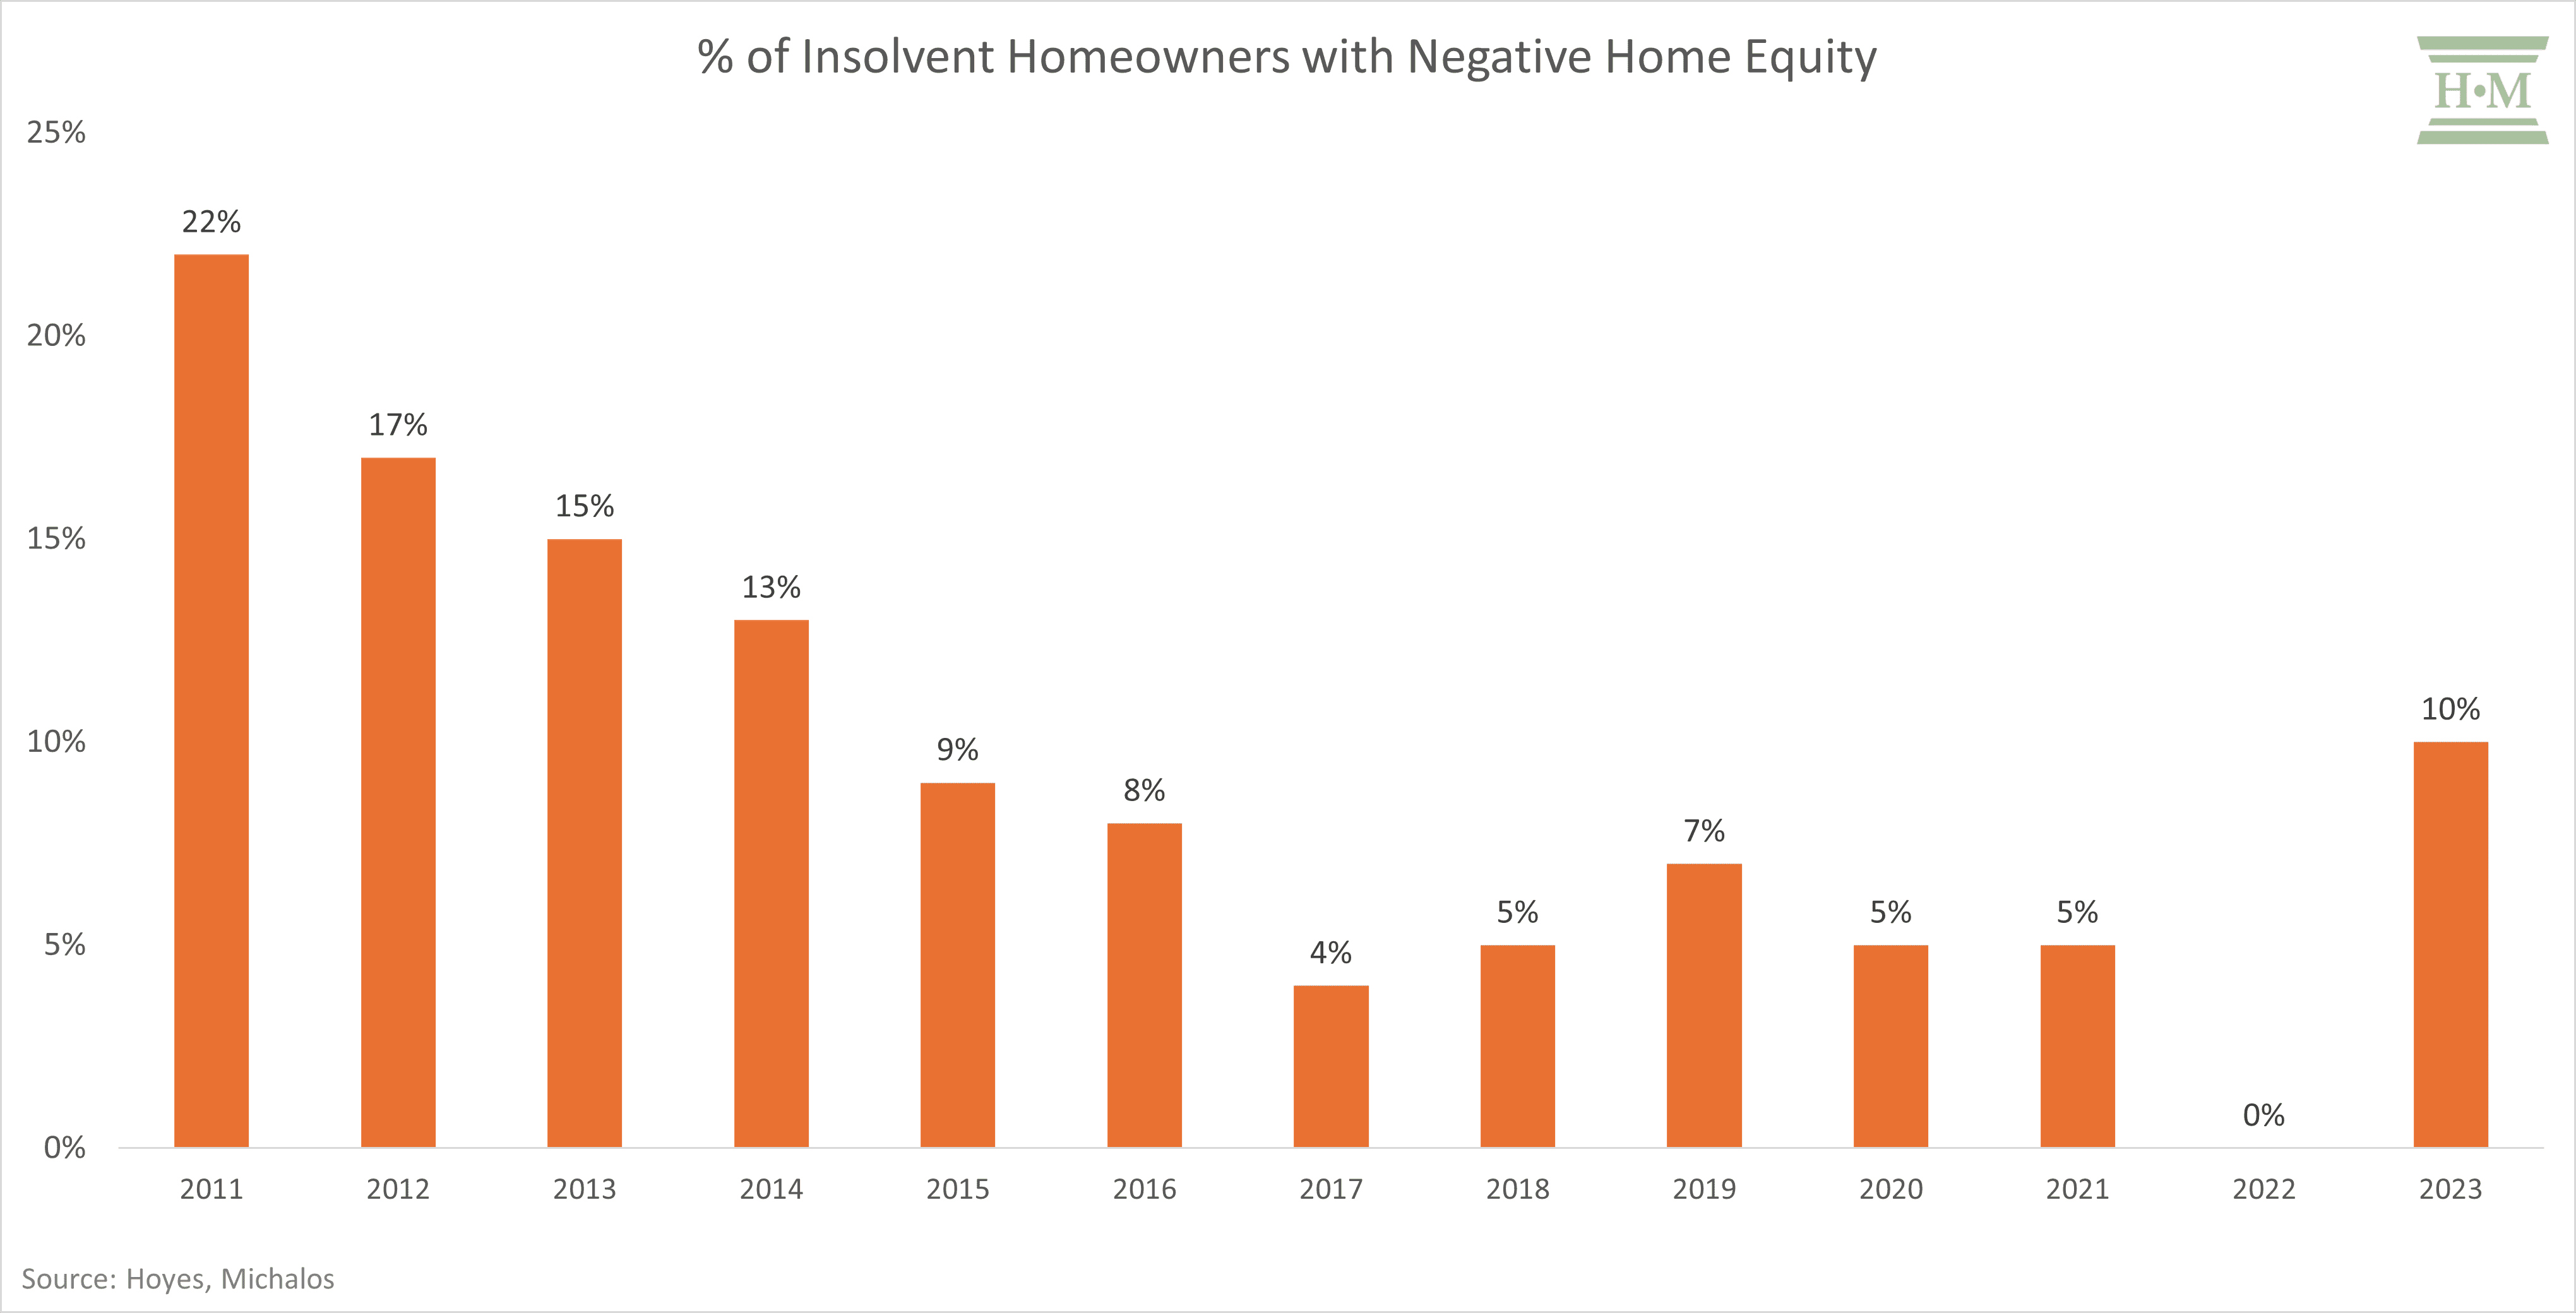 Percentage of Insolvent Homeowners with Negative Home Equity